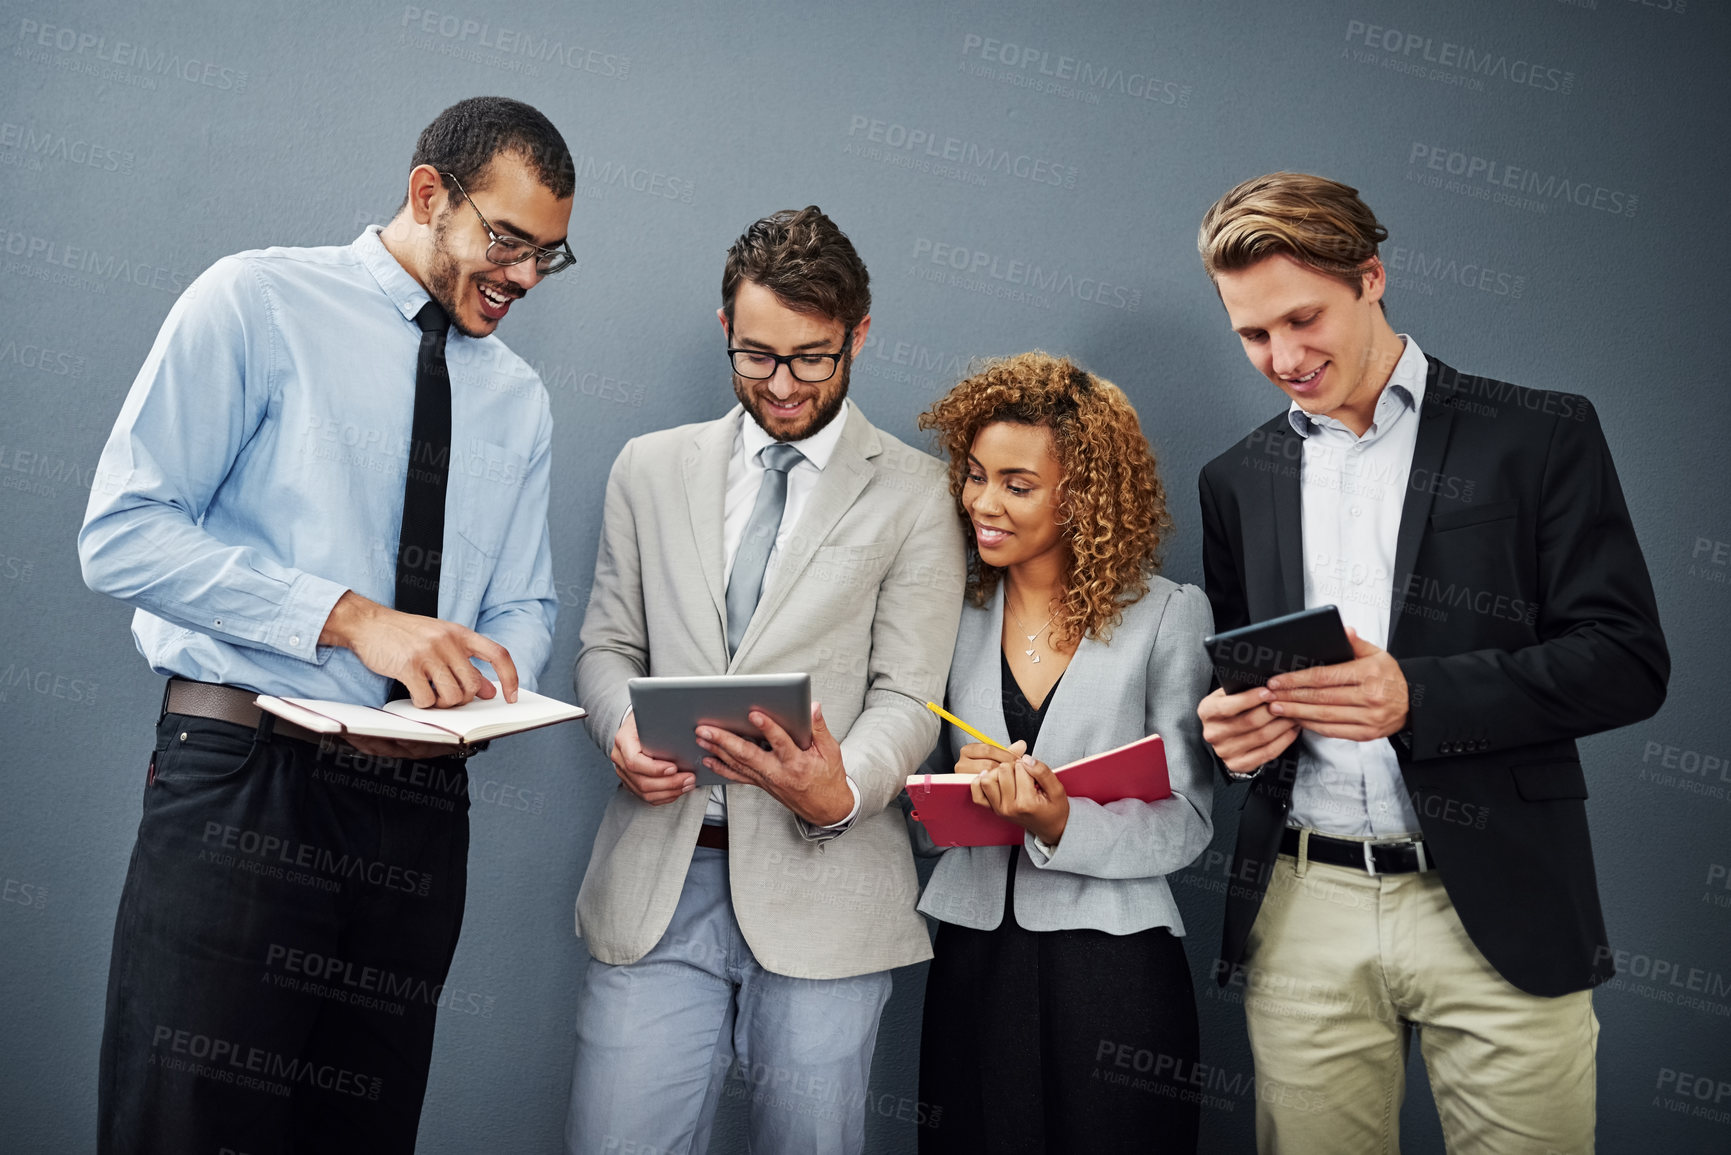 Buy stock photo Cropped shot of a group of businesspeople using digital tablets and notebooks while waiting in line for a job interview